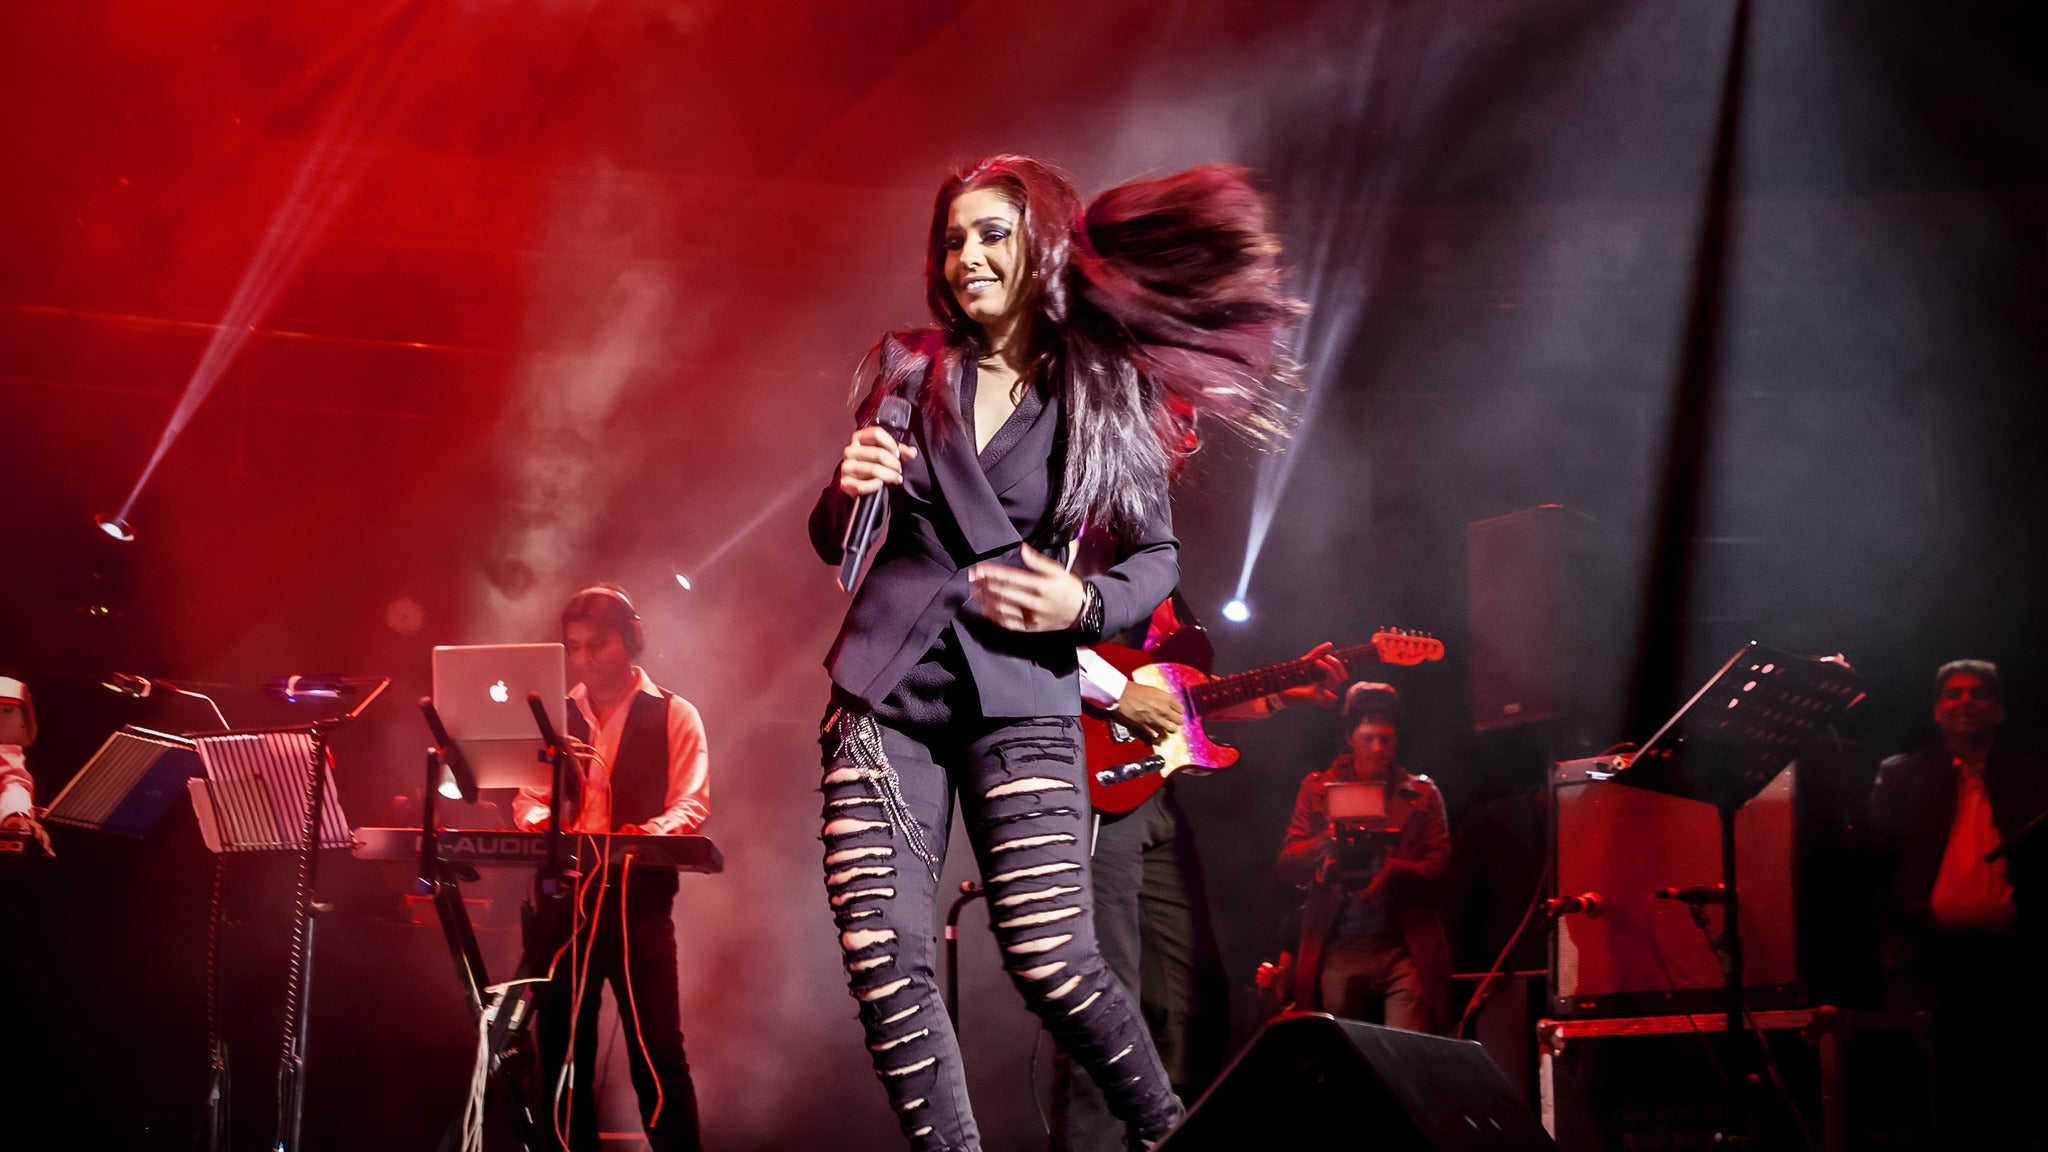 Sunidhi Chauhan Live in the UK